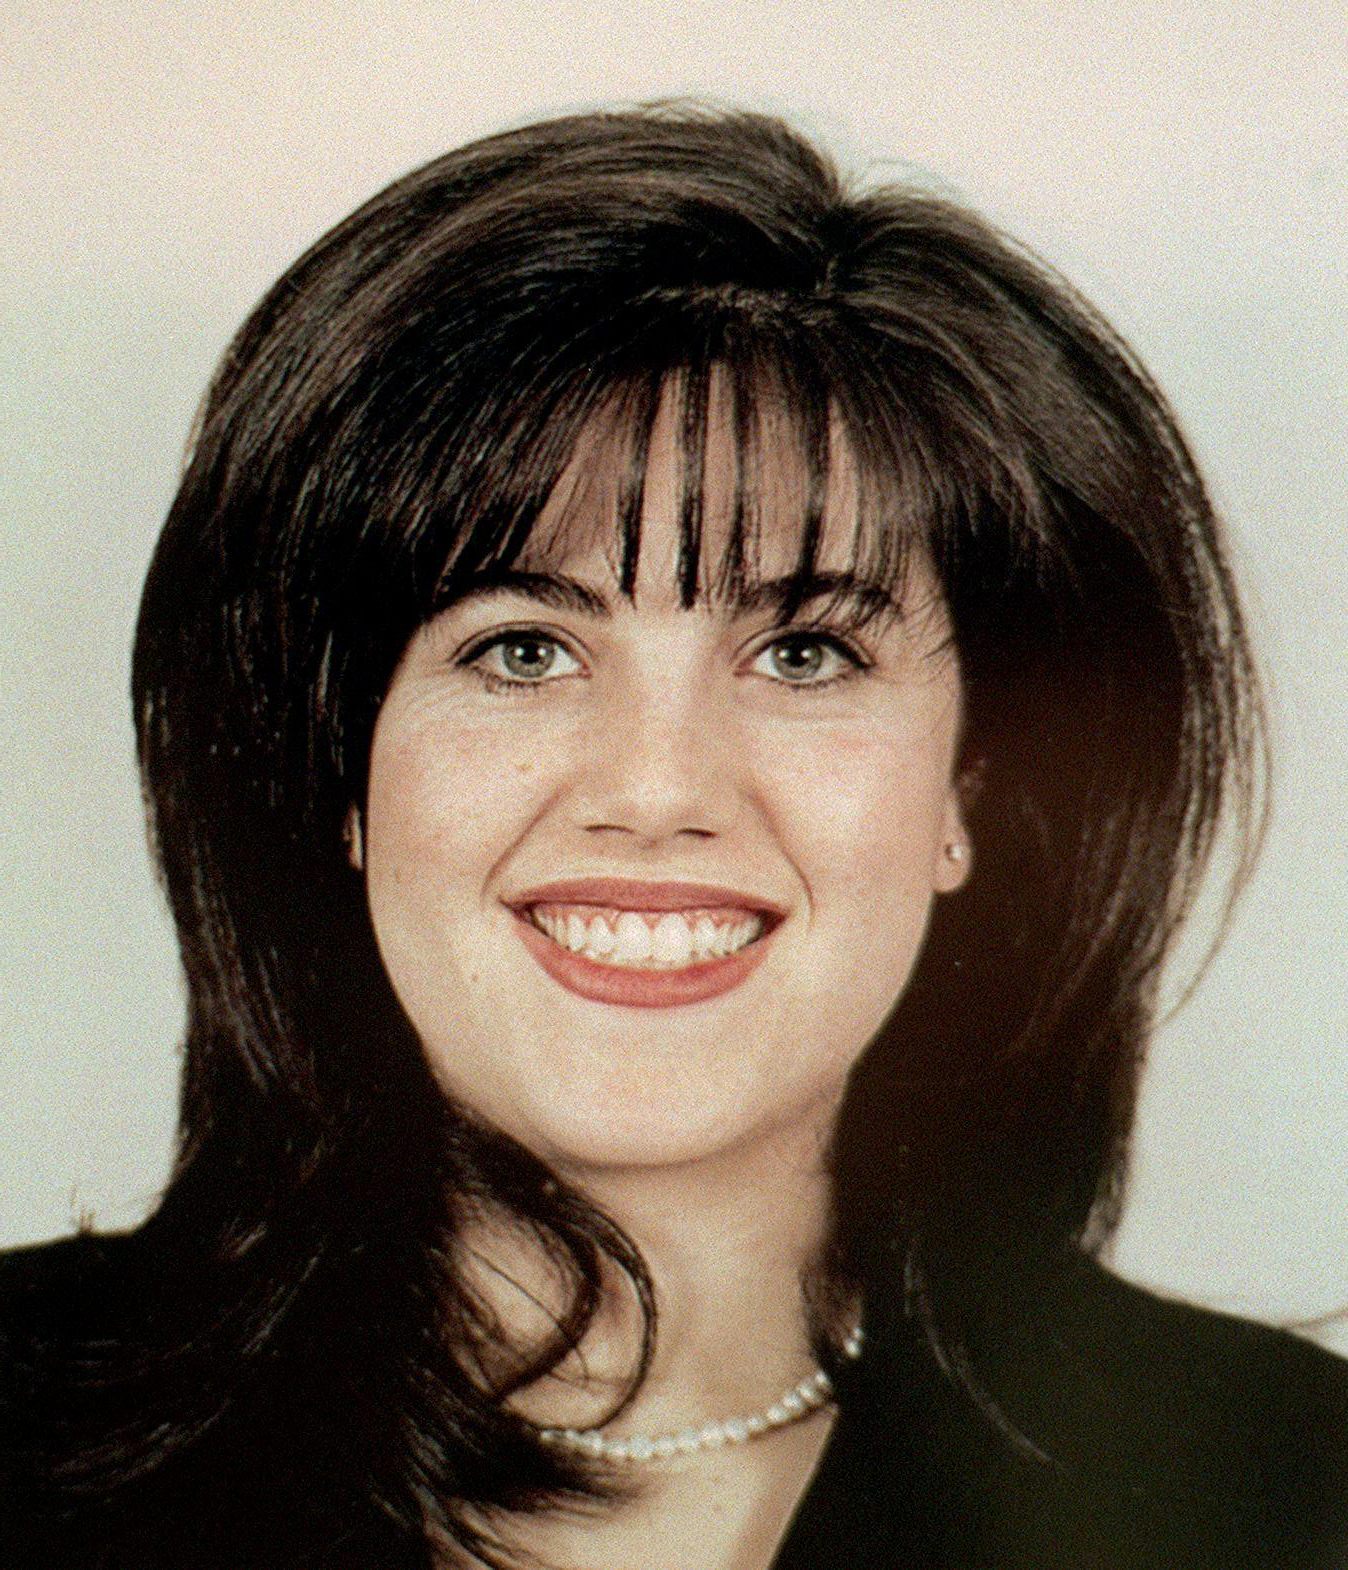 Monica Lewinsky pictured on January 21, 1998 | Source: Getty Images